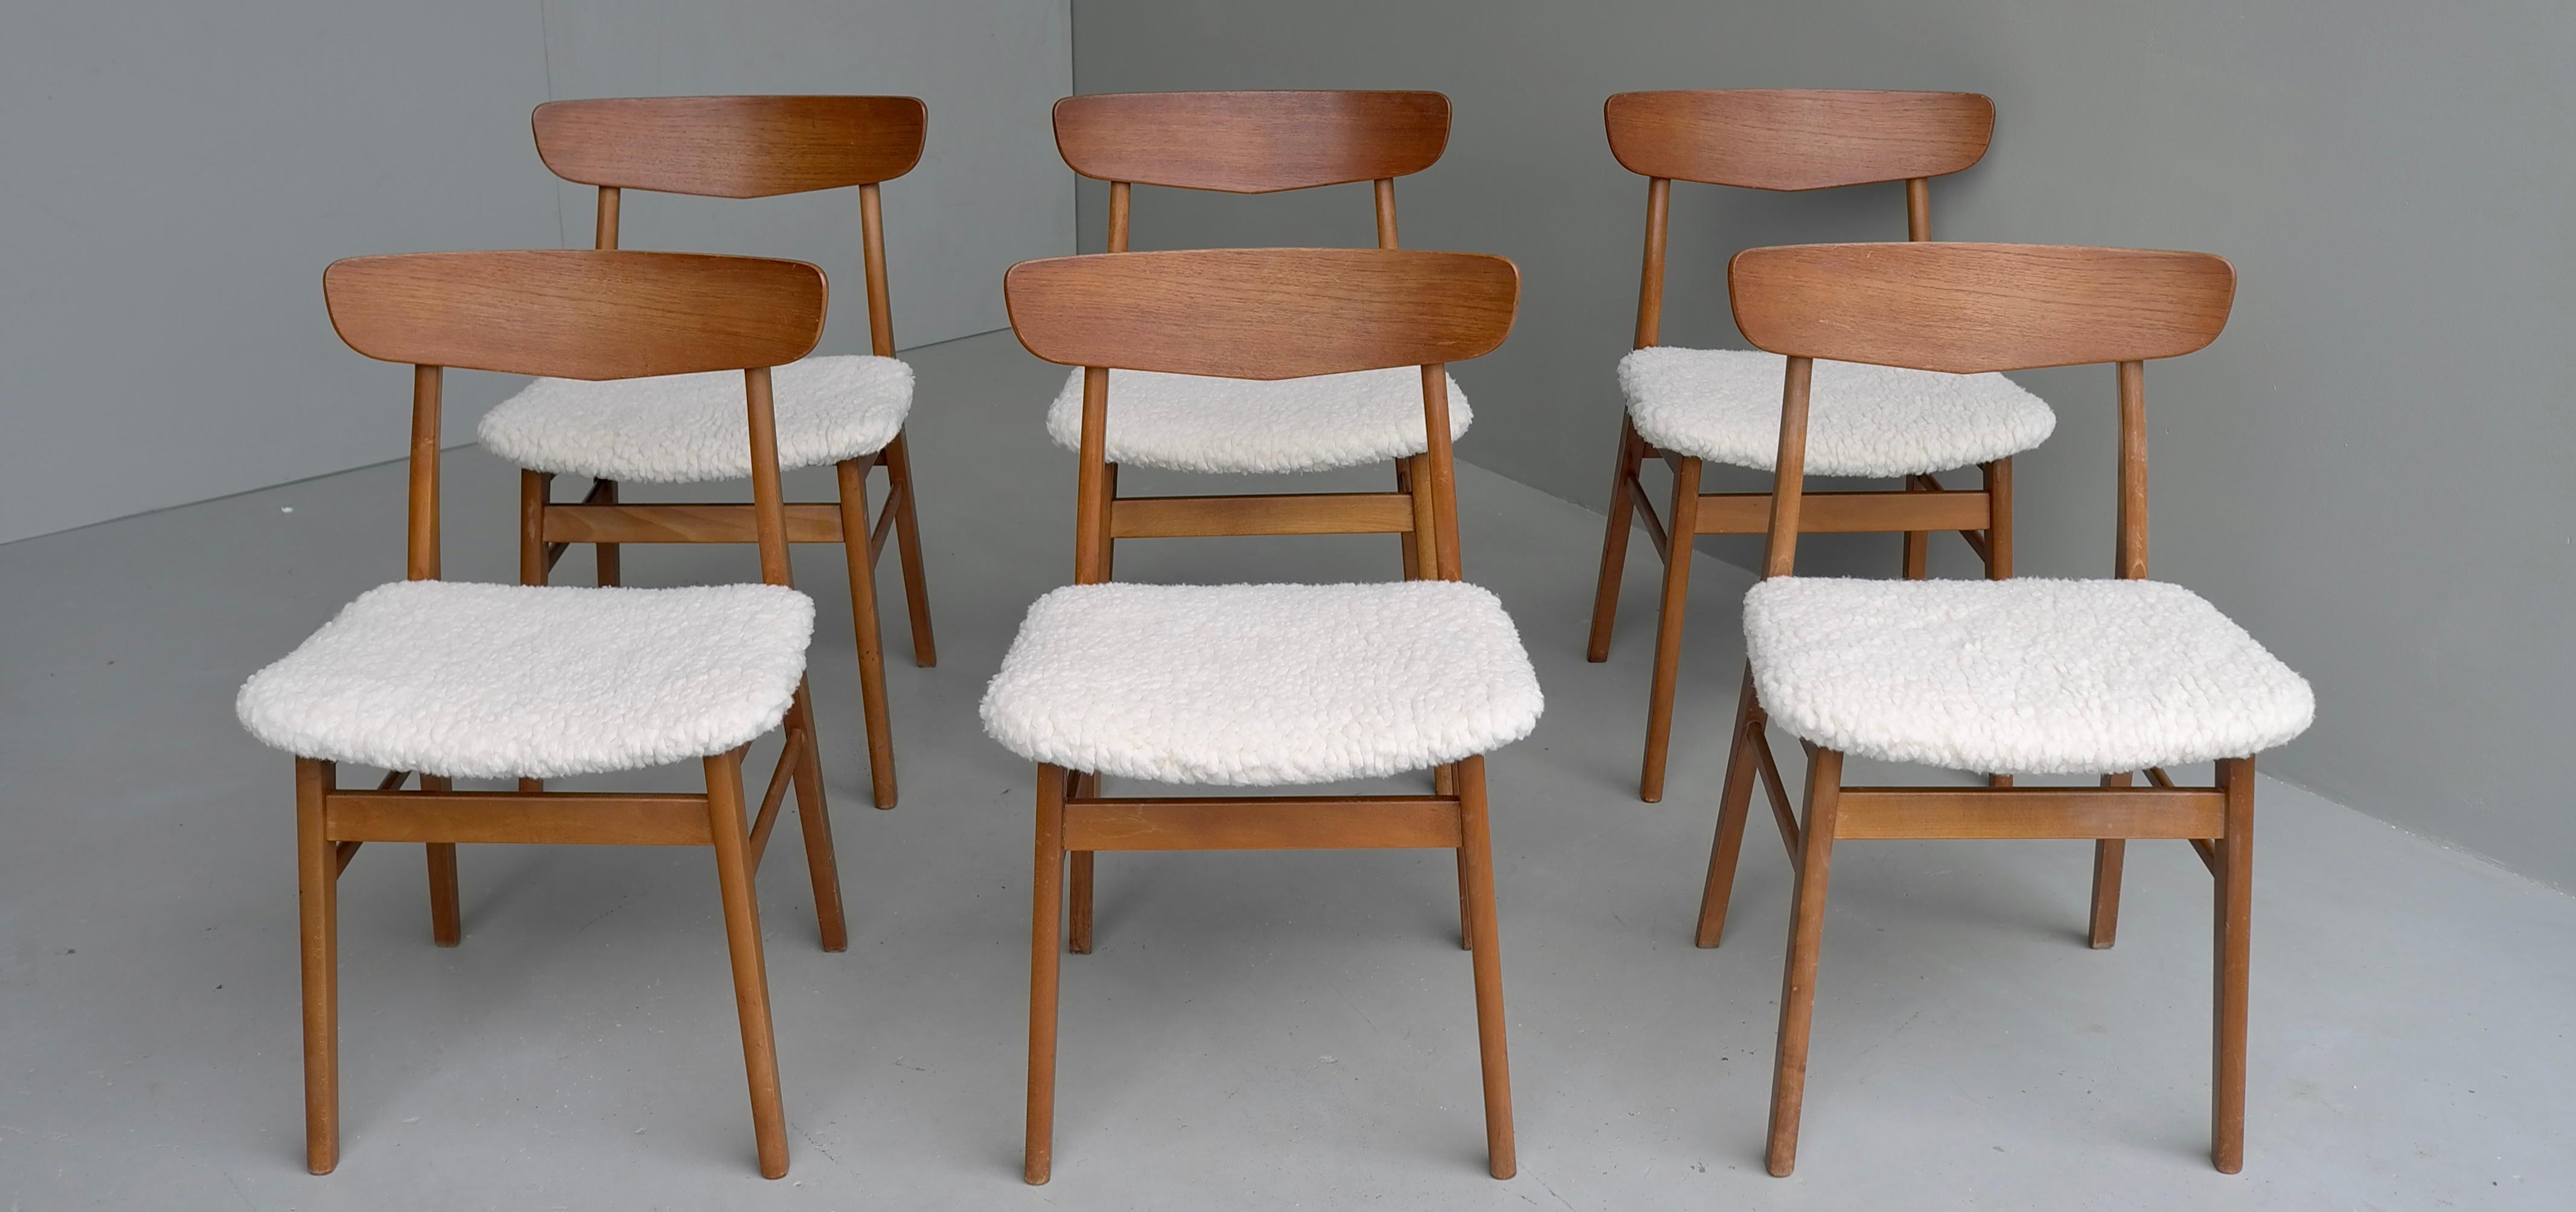 Set of six teak Danish chairs with seats in pure Merino wool, by Farstrup Møbler.